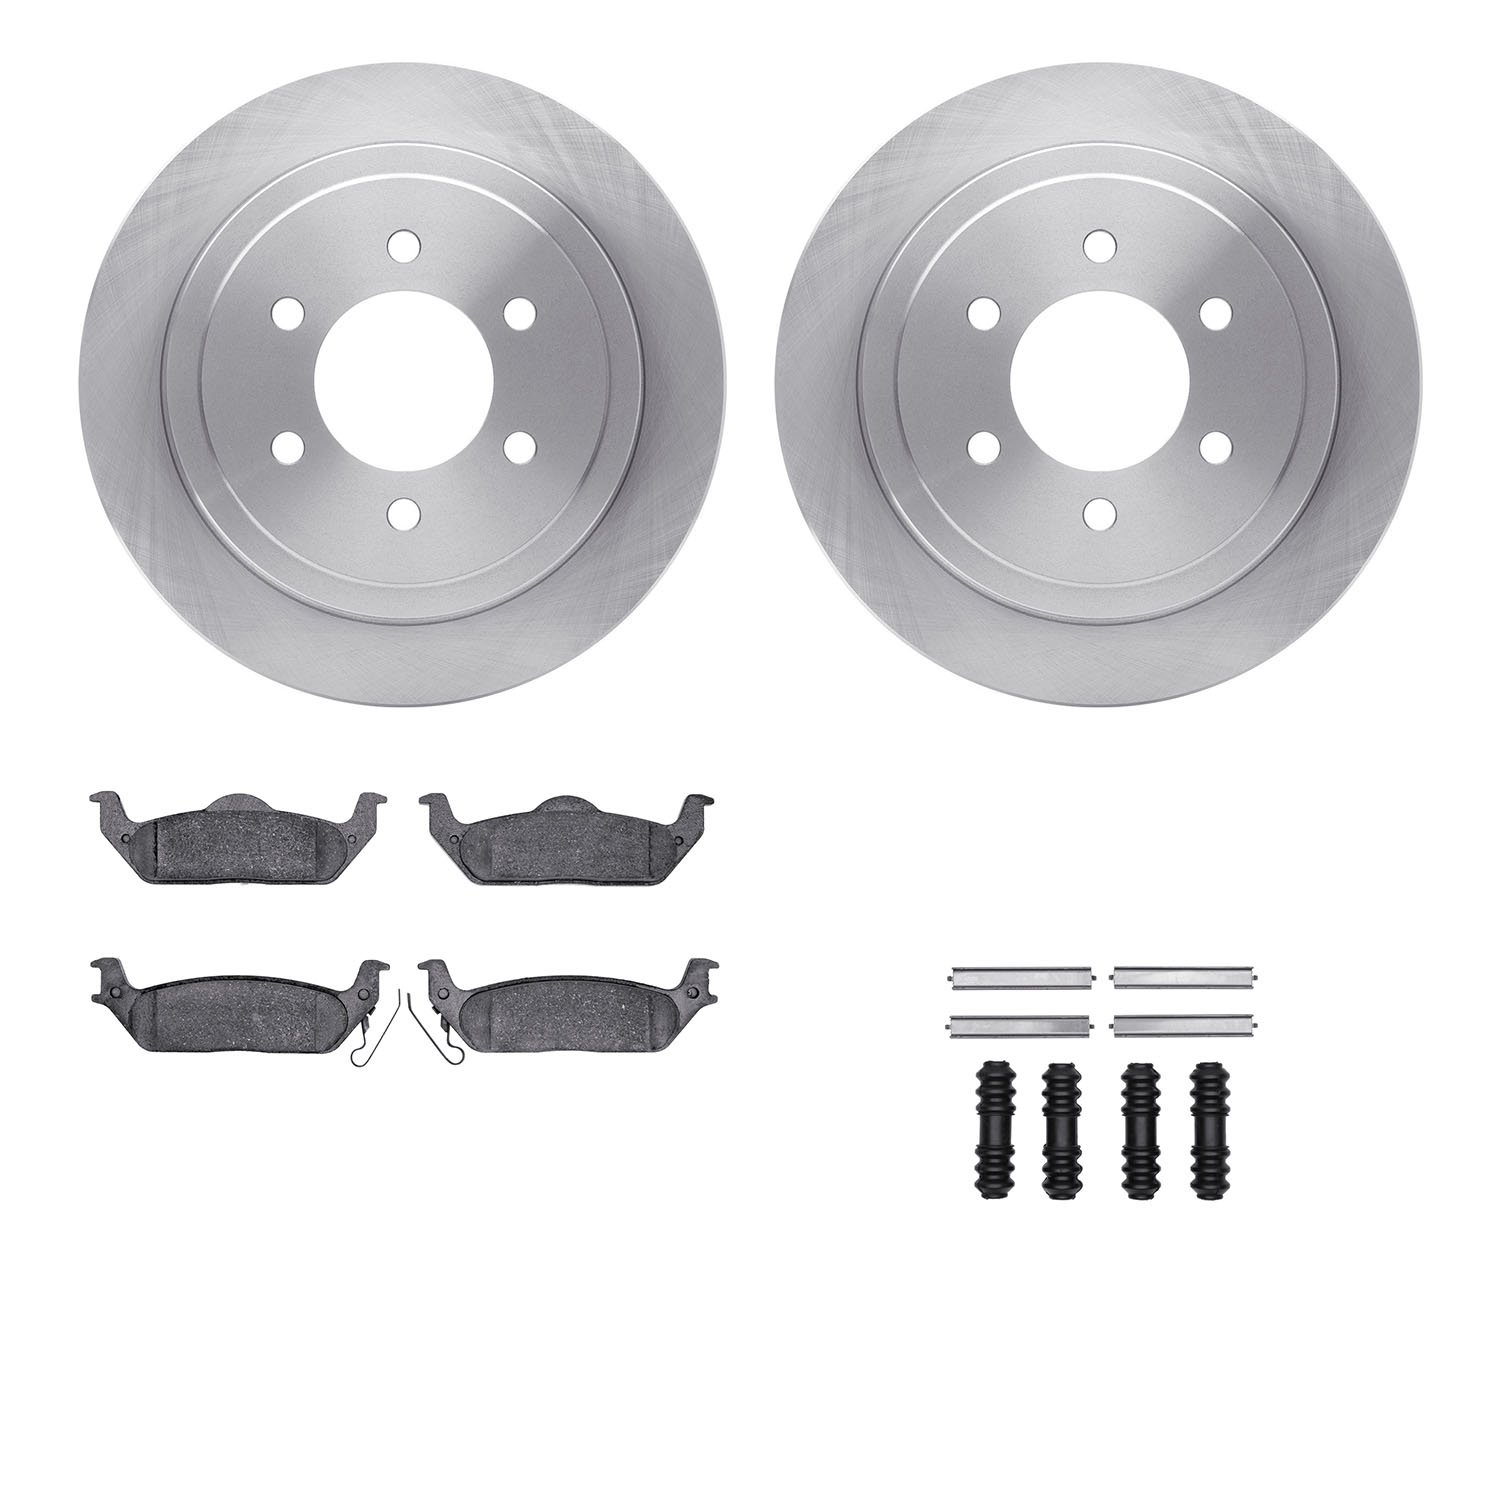 6412-54221 Brake Rotors with Ultimate-Duty Brake Pads Kit & Hardware, 2004-2011 Ford/Lincoln/Mercury/Mazda, Position: Rear